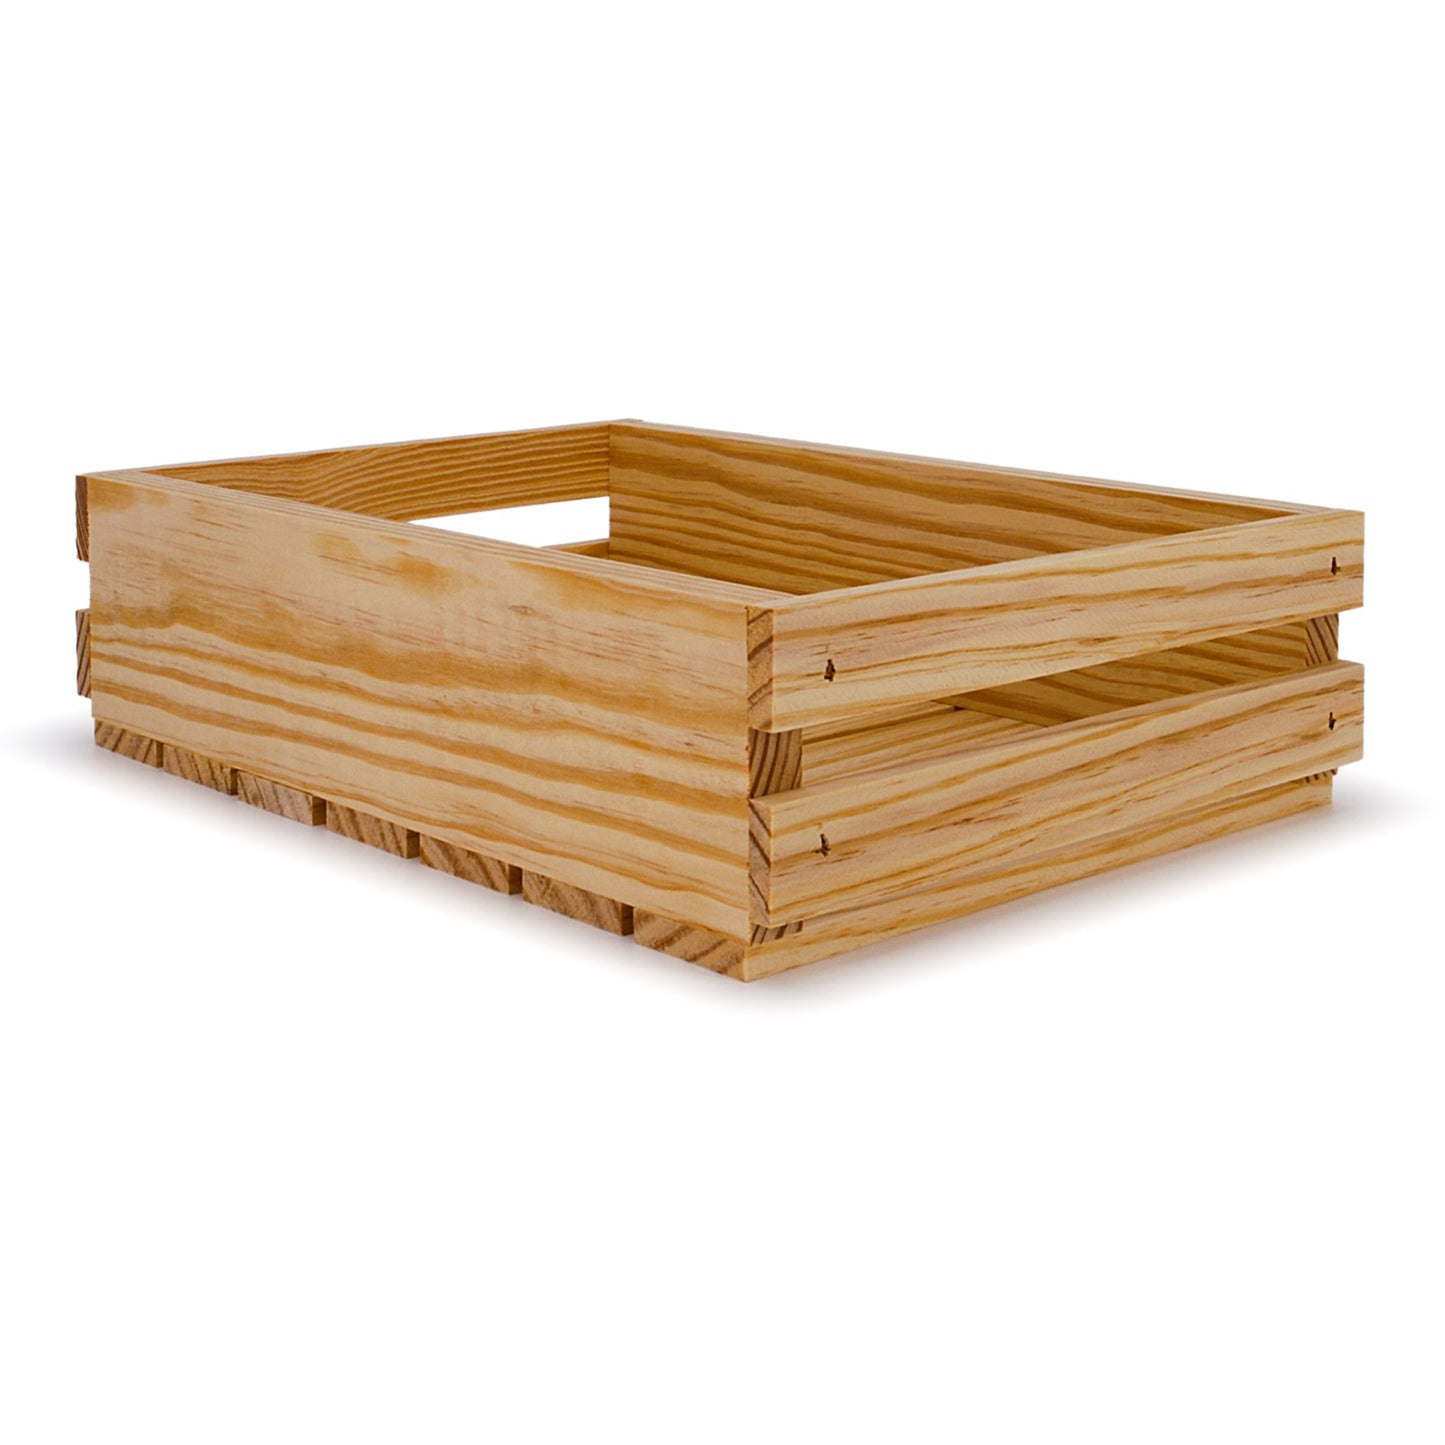 Small wooden crates 9x14x3.5, 6-SS-9-14-3.5-NX-NW-NL, 12-SS-9-14-3.5-NX-NW-NL, 24-SS-9-14-3.5-NX-NW-NL, 48-SS-9-14-3.5-NX-NW-NL, 96-SS-9-14-3.5-NX-NW-NL